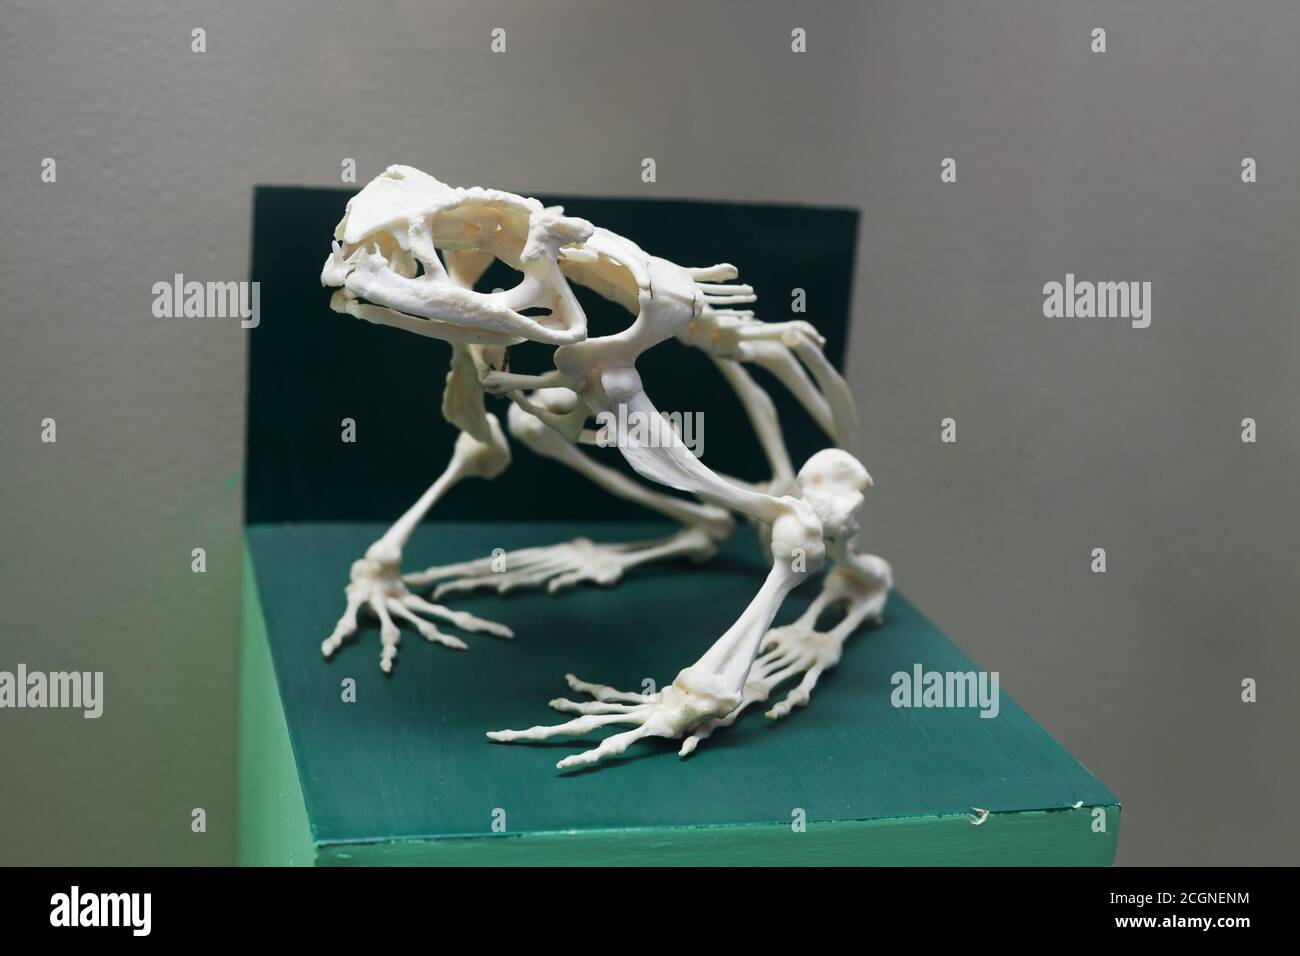 Closeup of a frog skeleton with selective focus Stock Photo